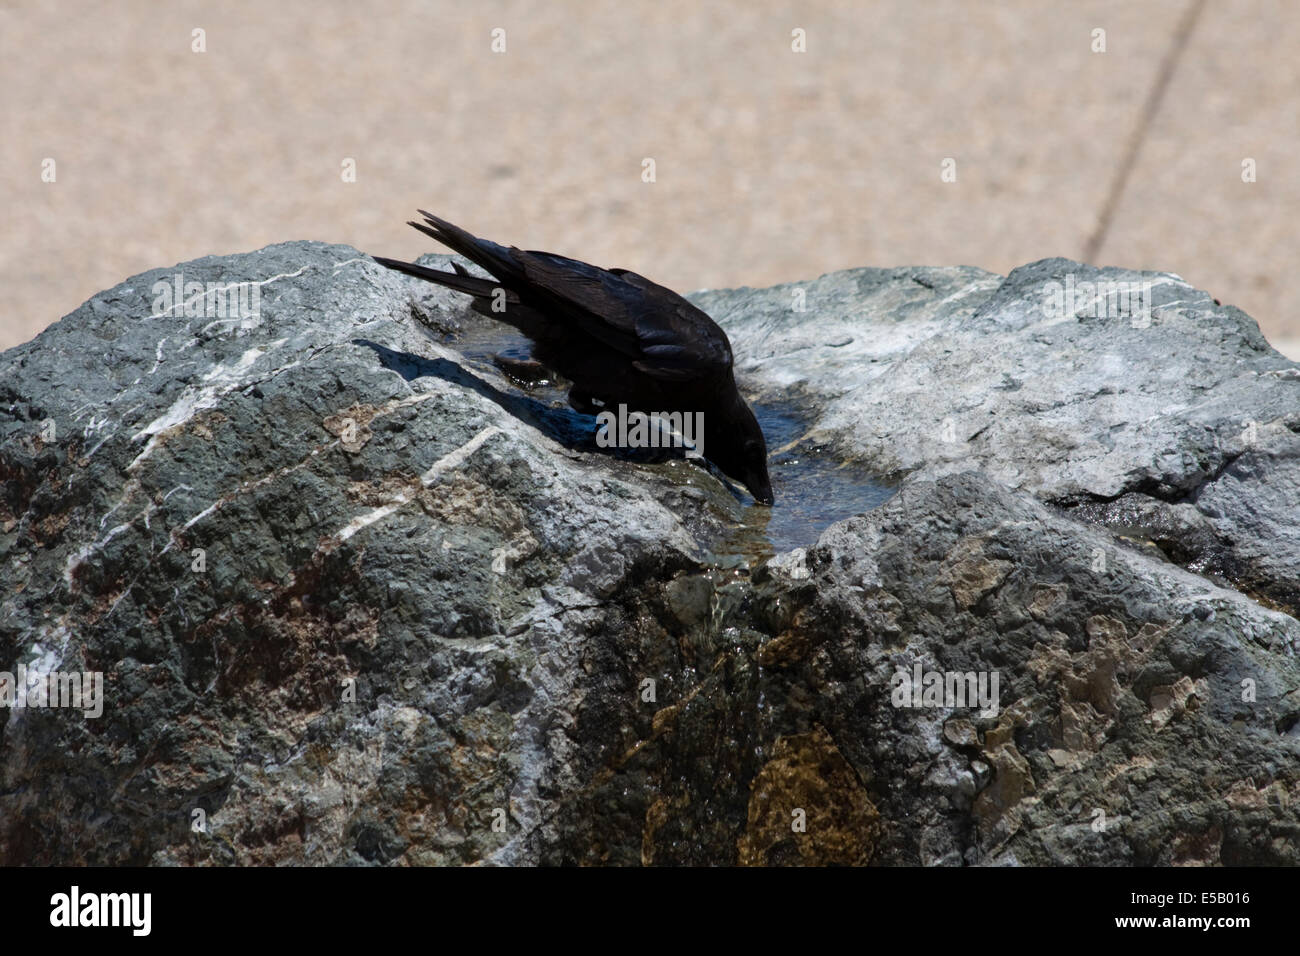 A crow taking a drink of water from a stone fountain in Monterey, California Stock Photo